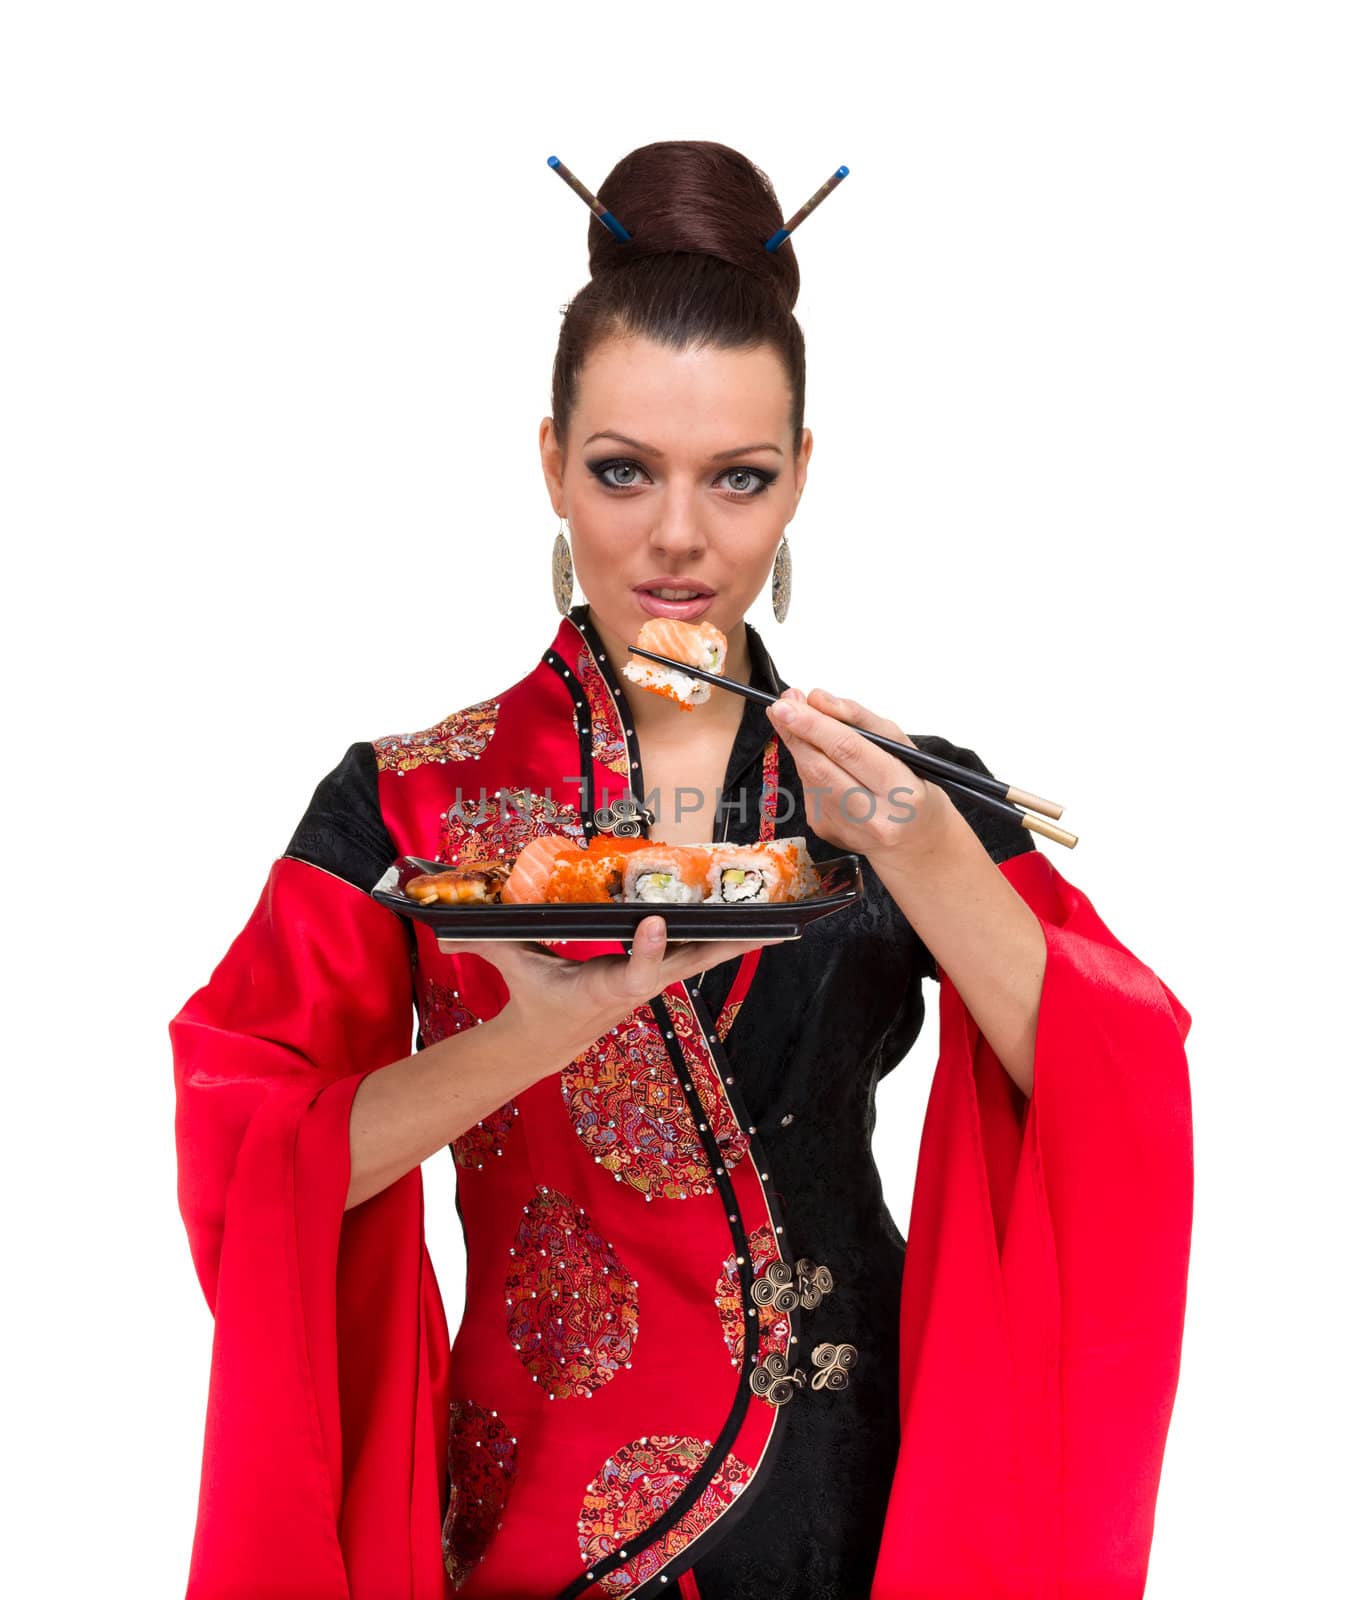 Attractive woman in traditional dress with sushi, isolated on white background.